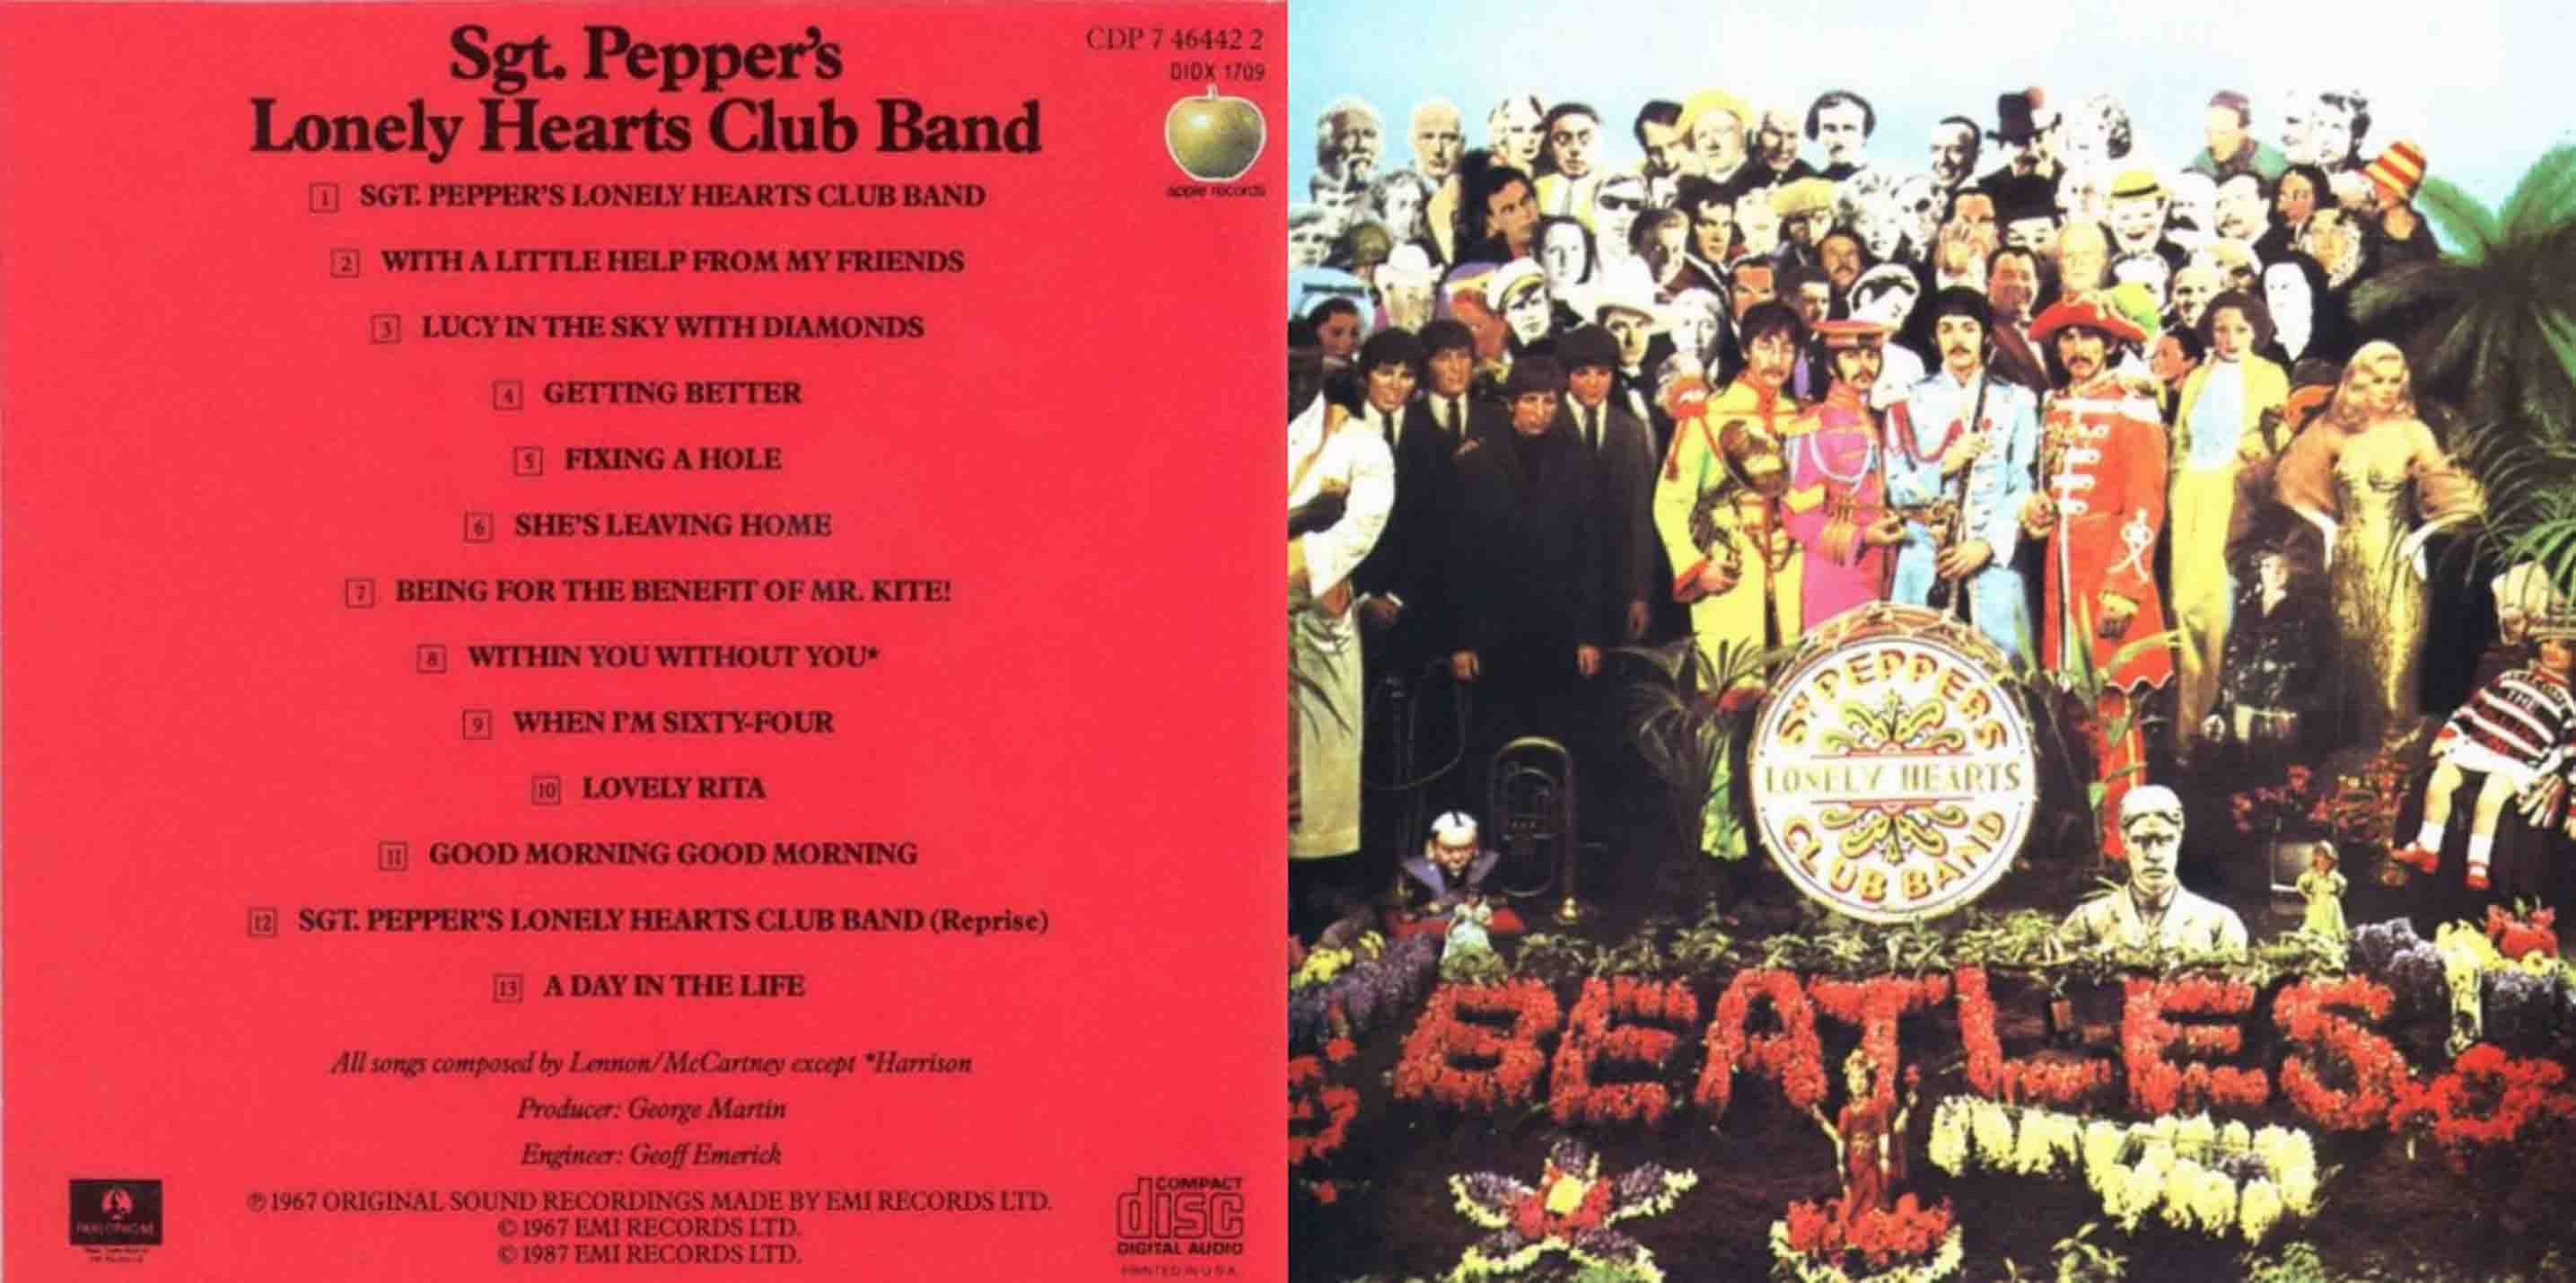 Beatles sgt peppers lonely hearts club. Обложке пластинки Sgt. Pepper's Lonely Hearts Club Band (1967 г.).. Sgt. Pepper’s Lonely Hearts Club Band the Beatles. The Beatles Sgt Pepper оркестр 1967. The Beatles Sgt Pepper студия 1967.